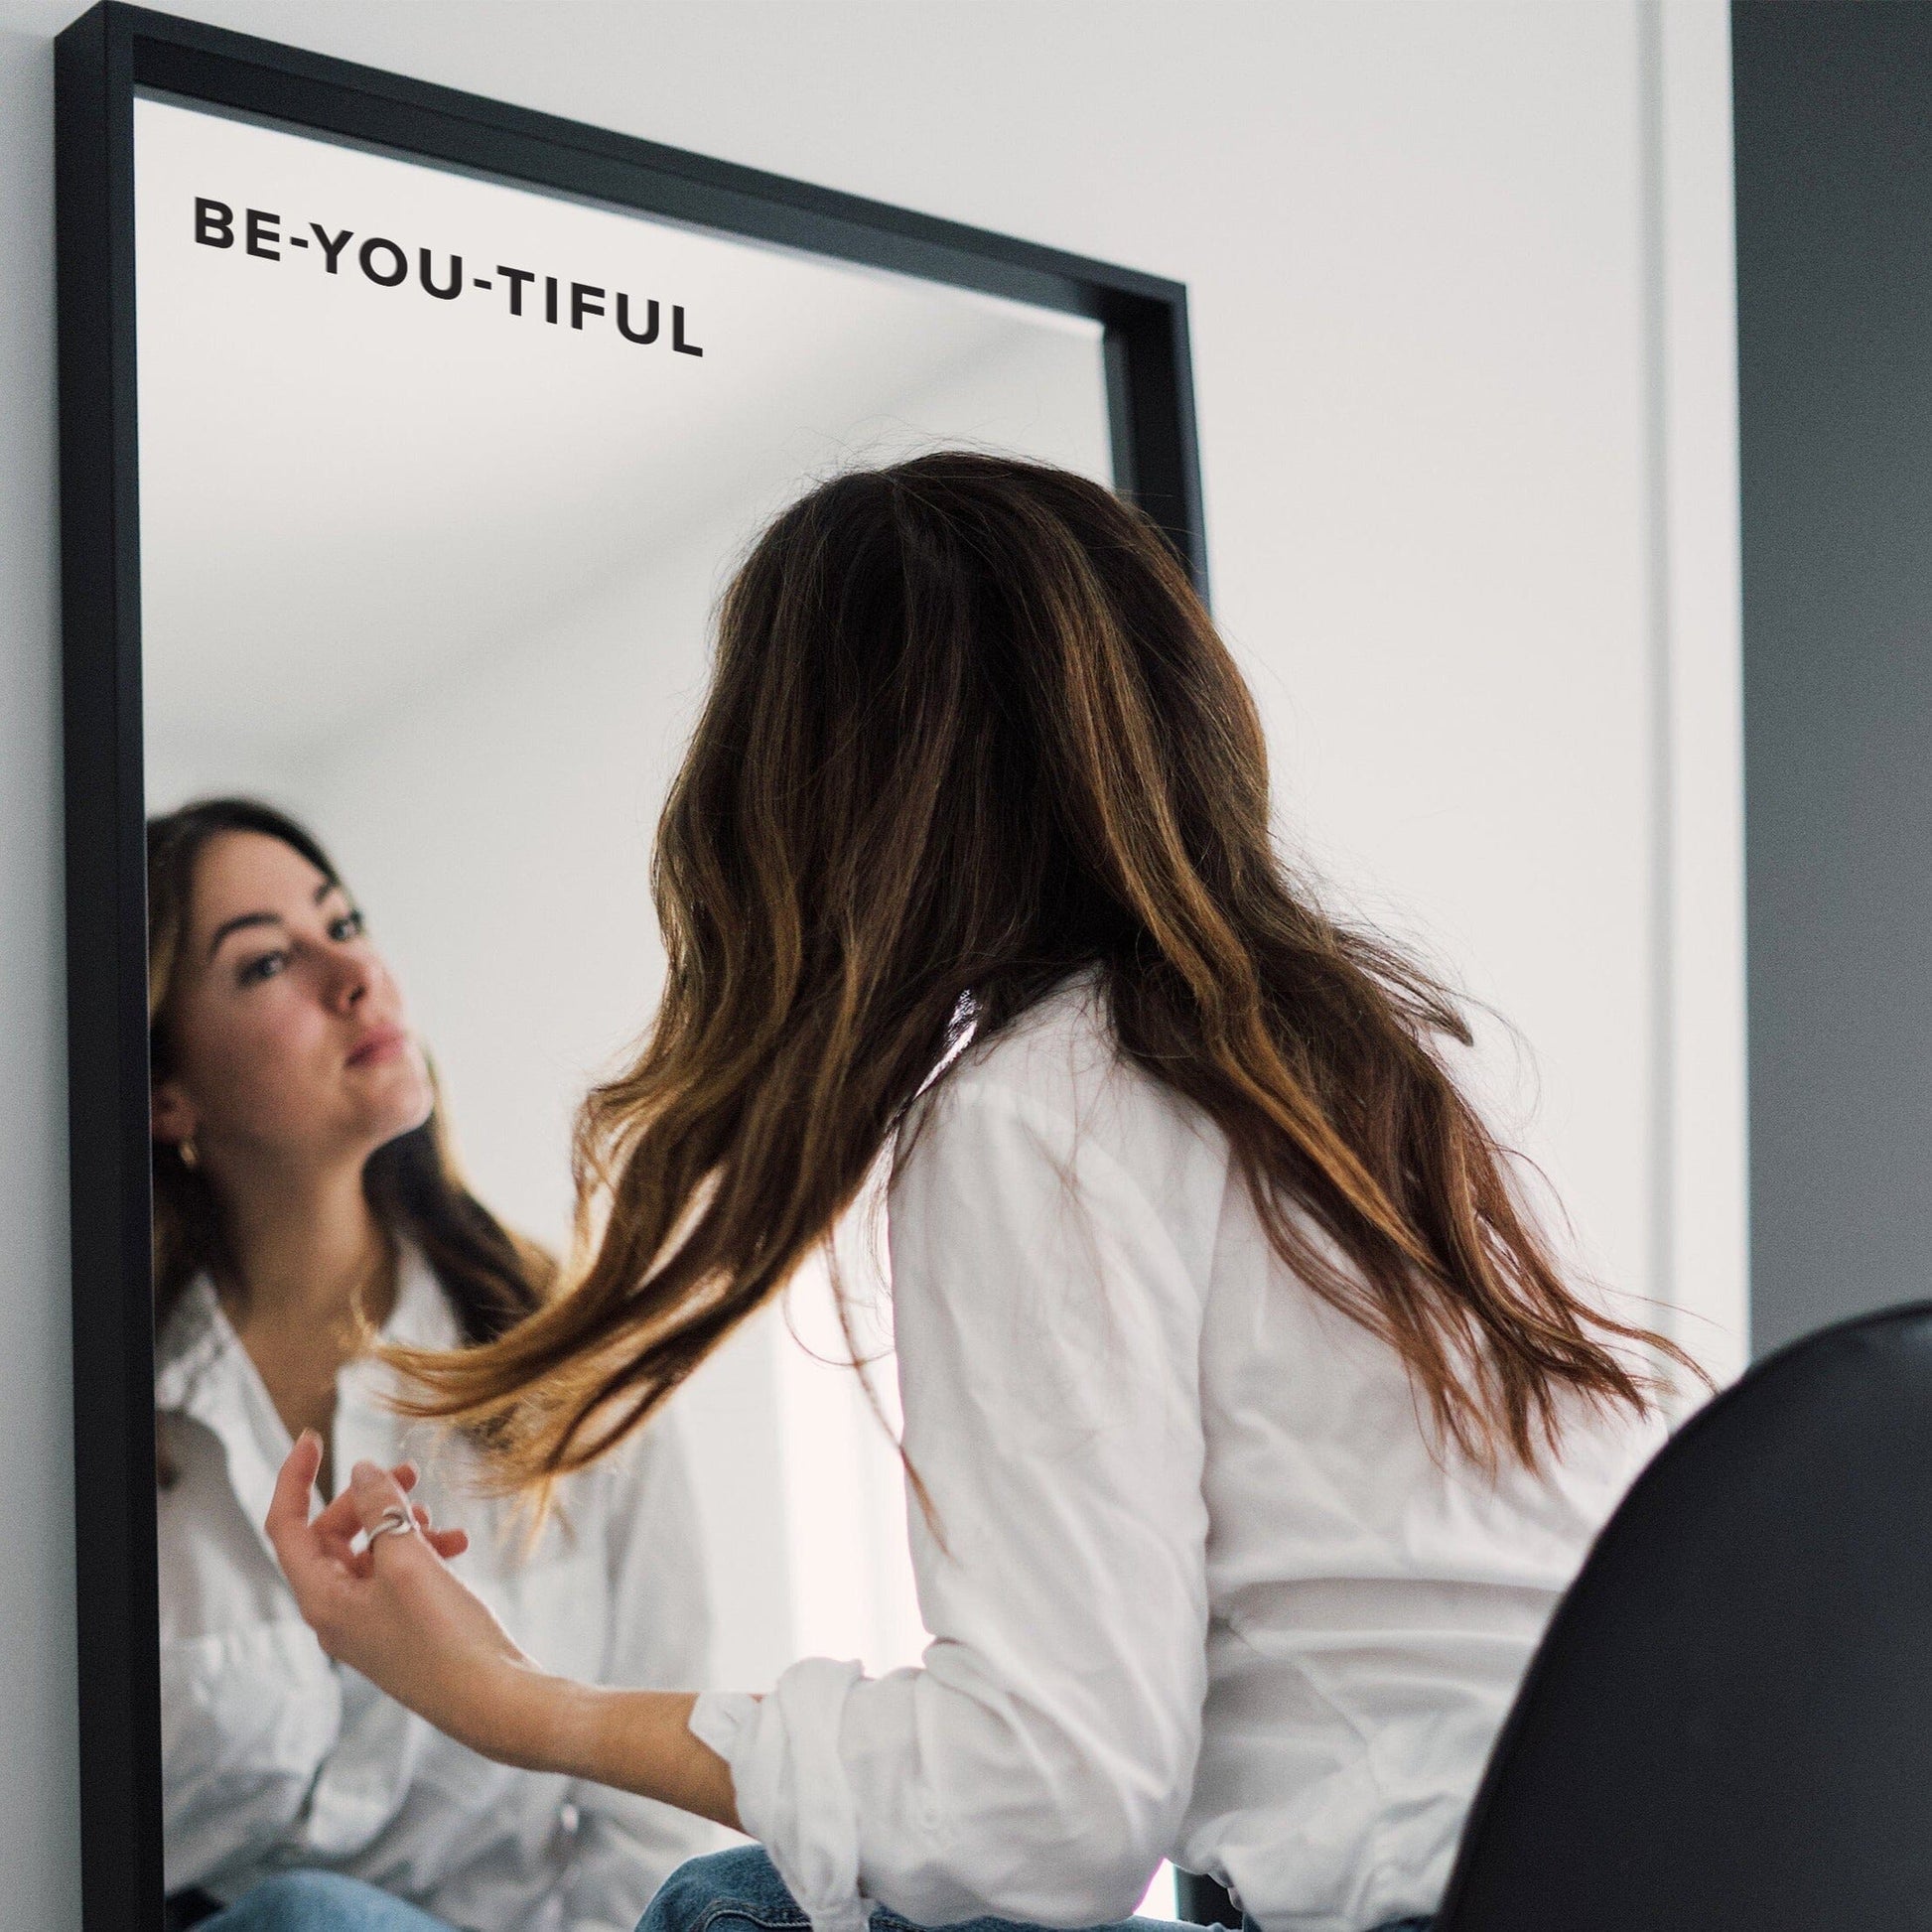 BE-YOU-TIFUL Mirror Decal Decals Urbanwalls 